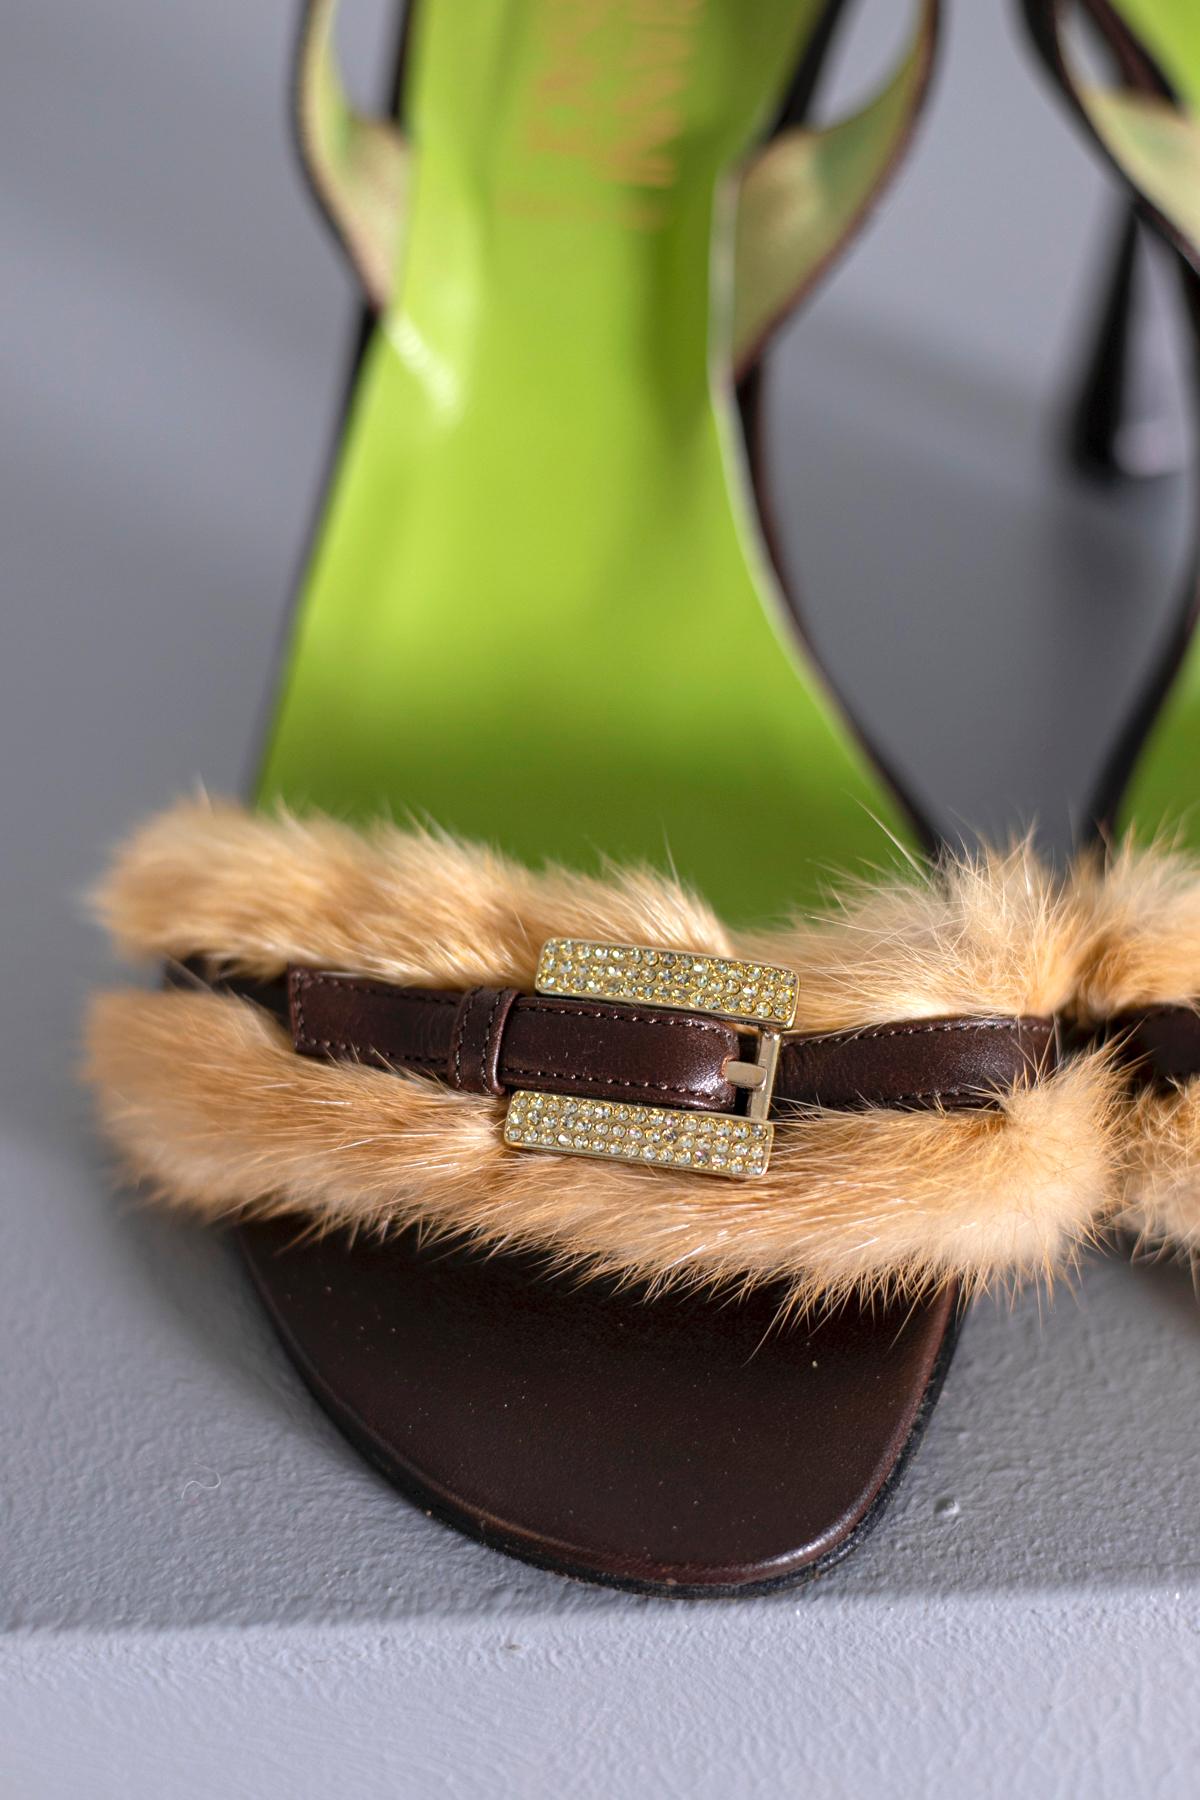 Gianni Versace 1990s Vintage Gianni Versace sandals in brown leather, embellished in the toe by a buckle covered with champagne rhinestones and beige fur. Adjustable leather strap with elastic band. Upper in green leather. Real leather sole with